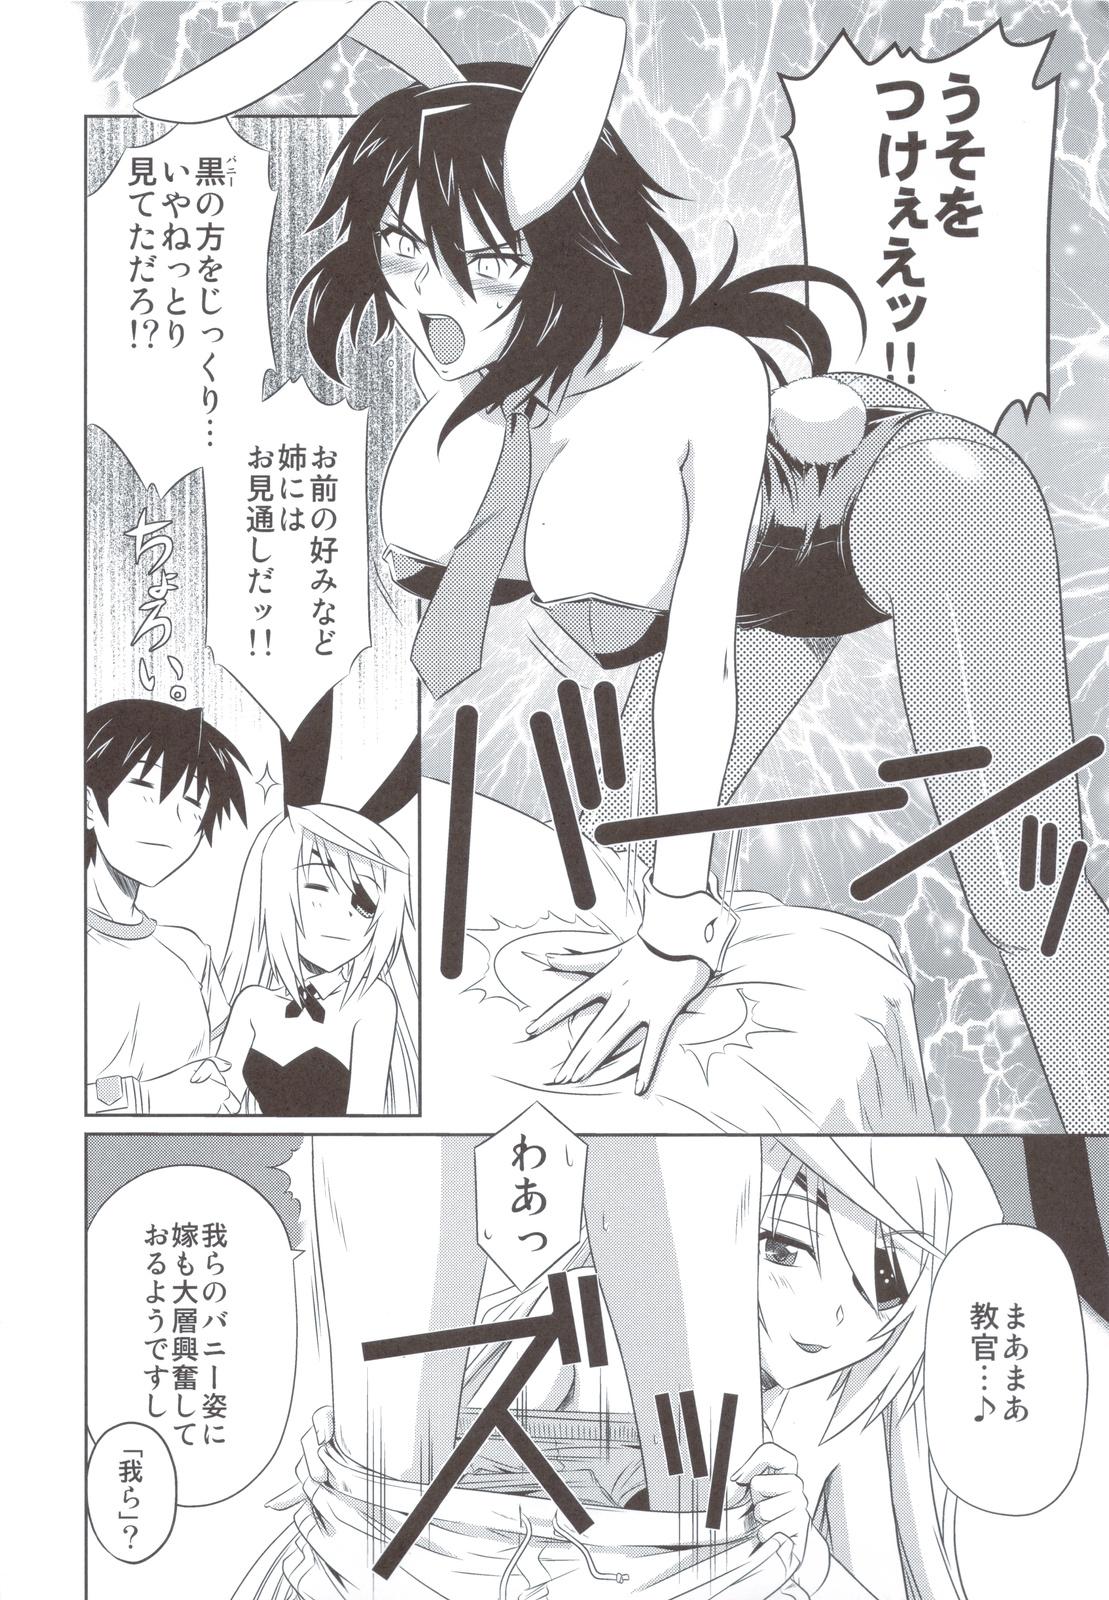 Hidden Cam is Incest Strategy 3 - Infinite stratos Teen Porn - Page 5